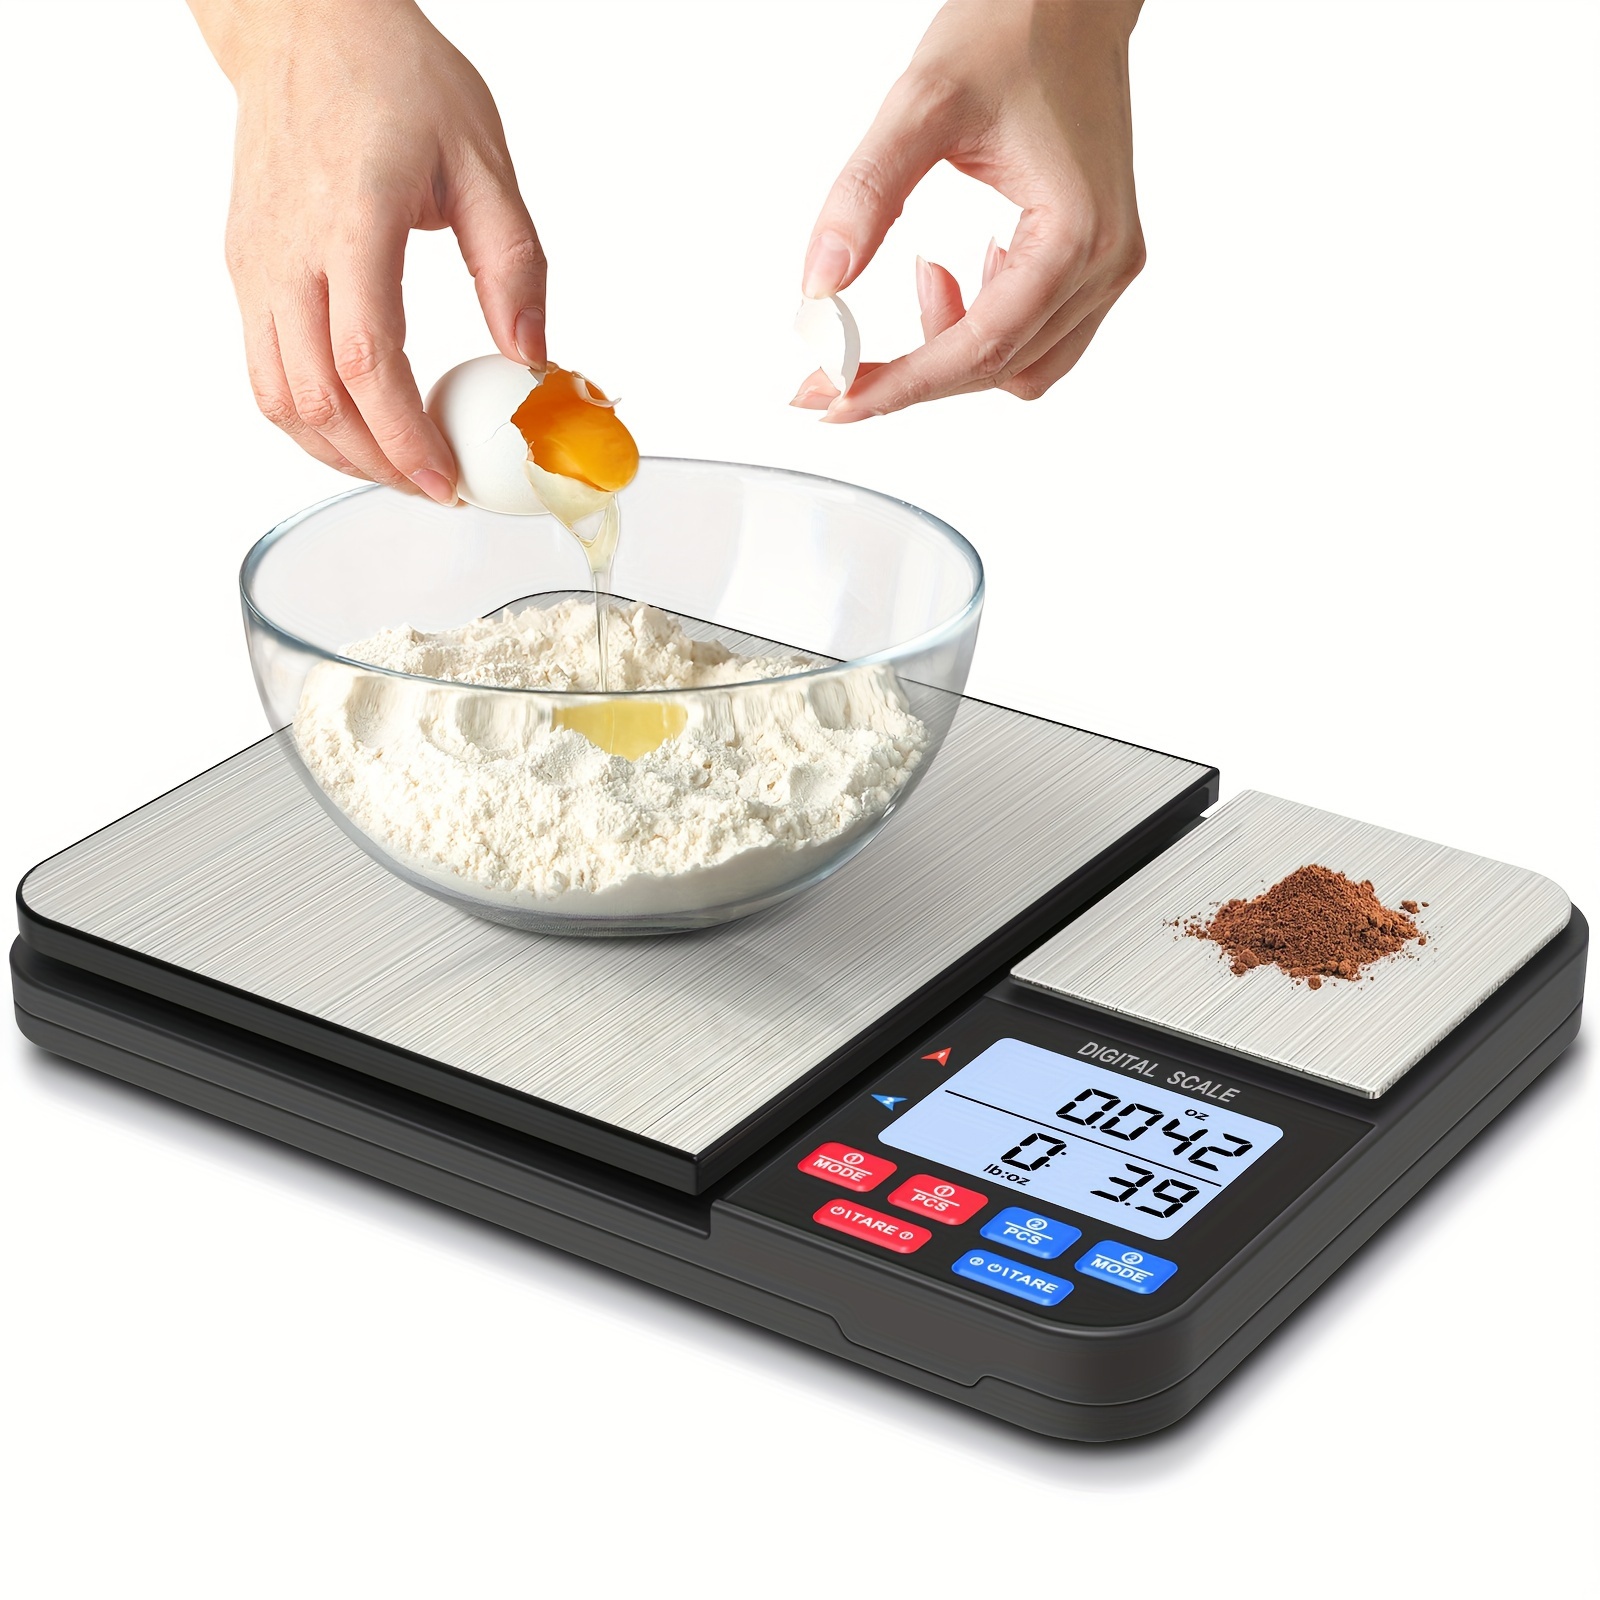 3kg 0.1g Pink Design Cute Digital Kitchen Scale Weight Balance 3000g For  Kitchen Food Cooking Tool Heart-shaped Plastics Scale - Buy Digital Kitchen